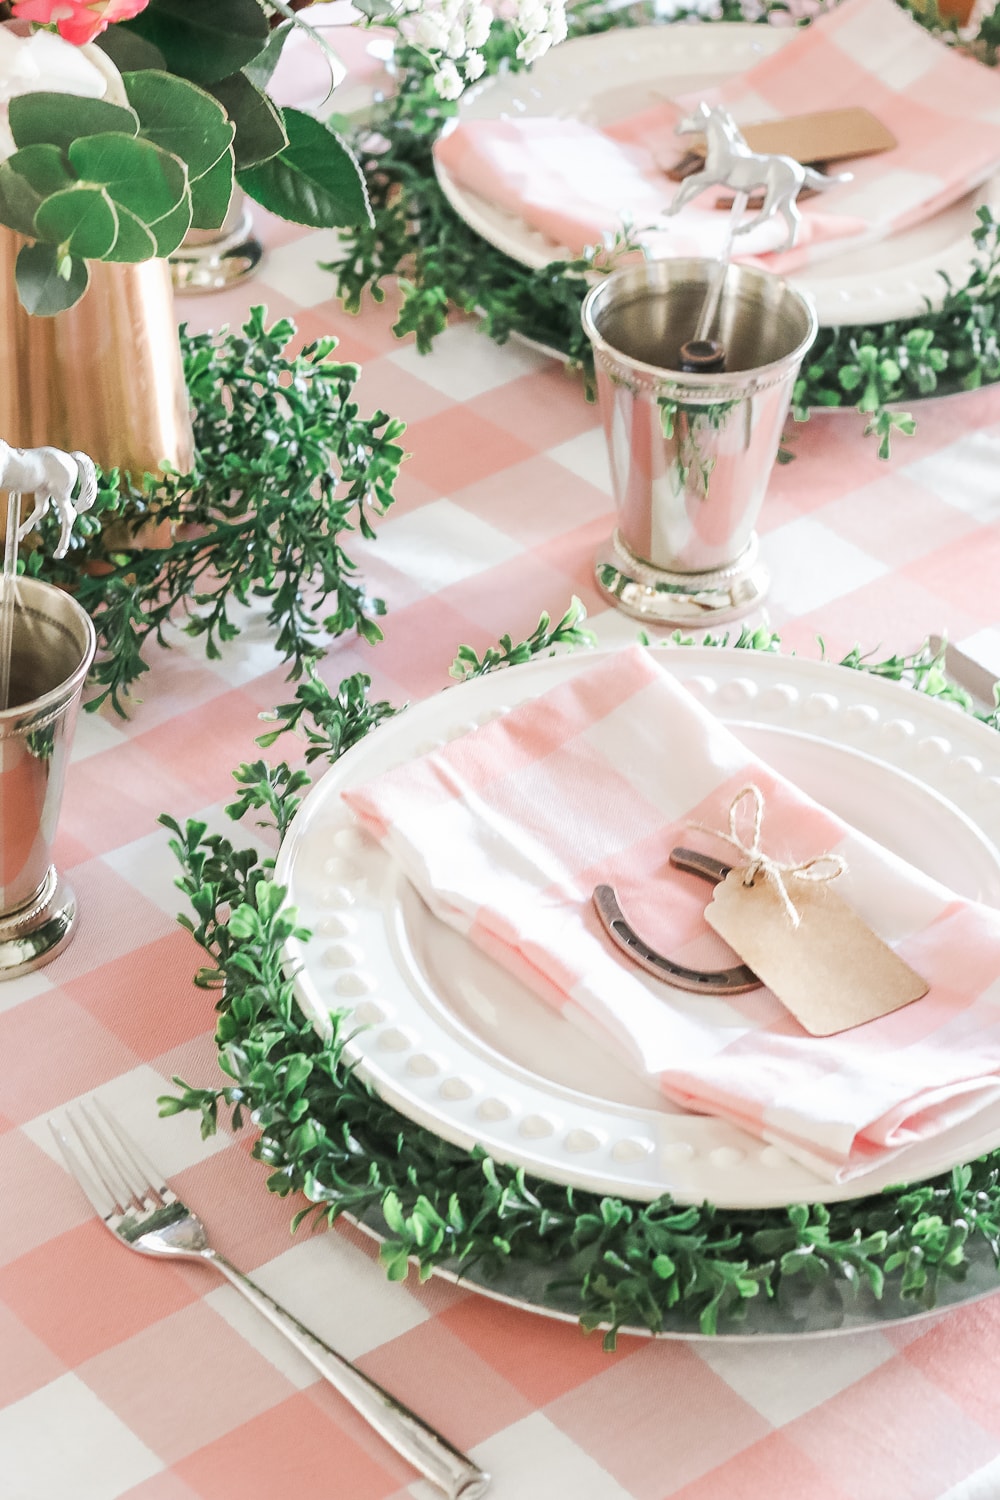 Southern blogger Stephanie Ziajka shows how to make your own DIY greenery charger plates and style them for Derby Day on Diary of a Debutante